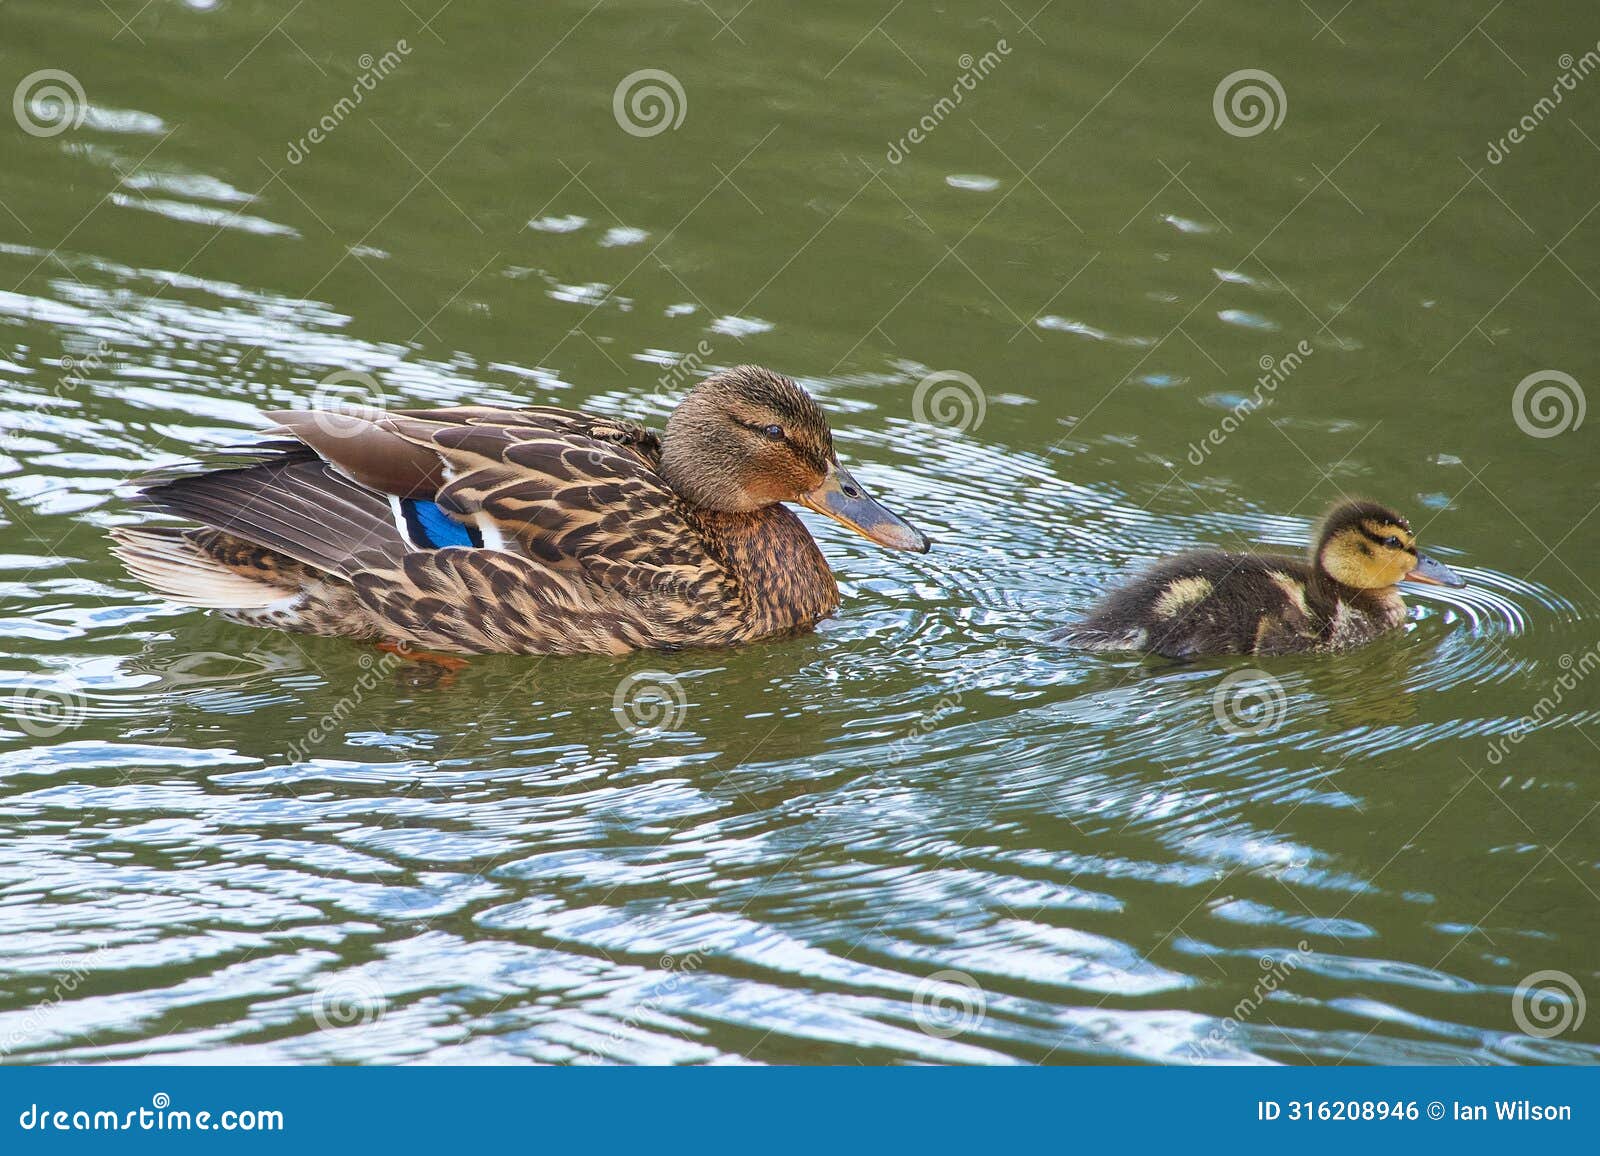 a mallard duckling swimming with adult parent duck